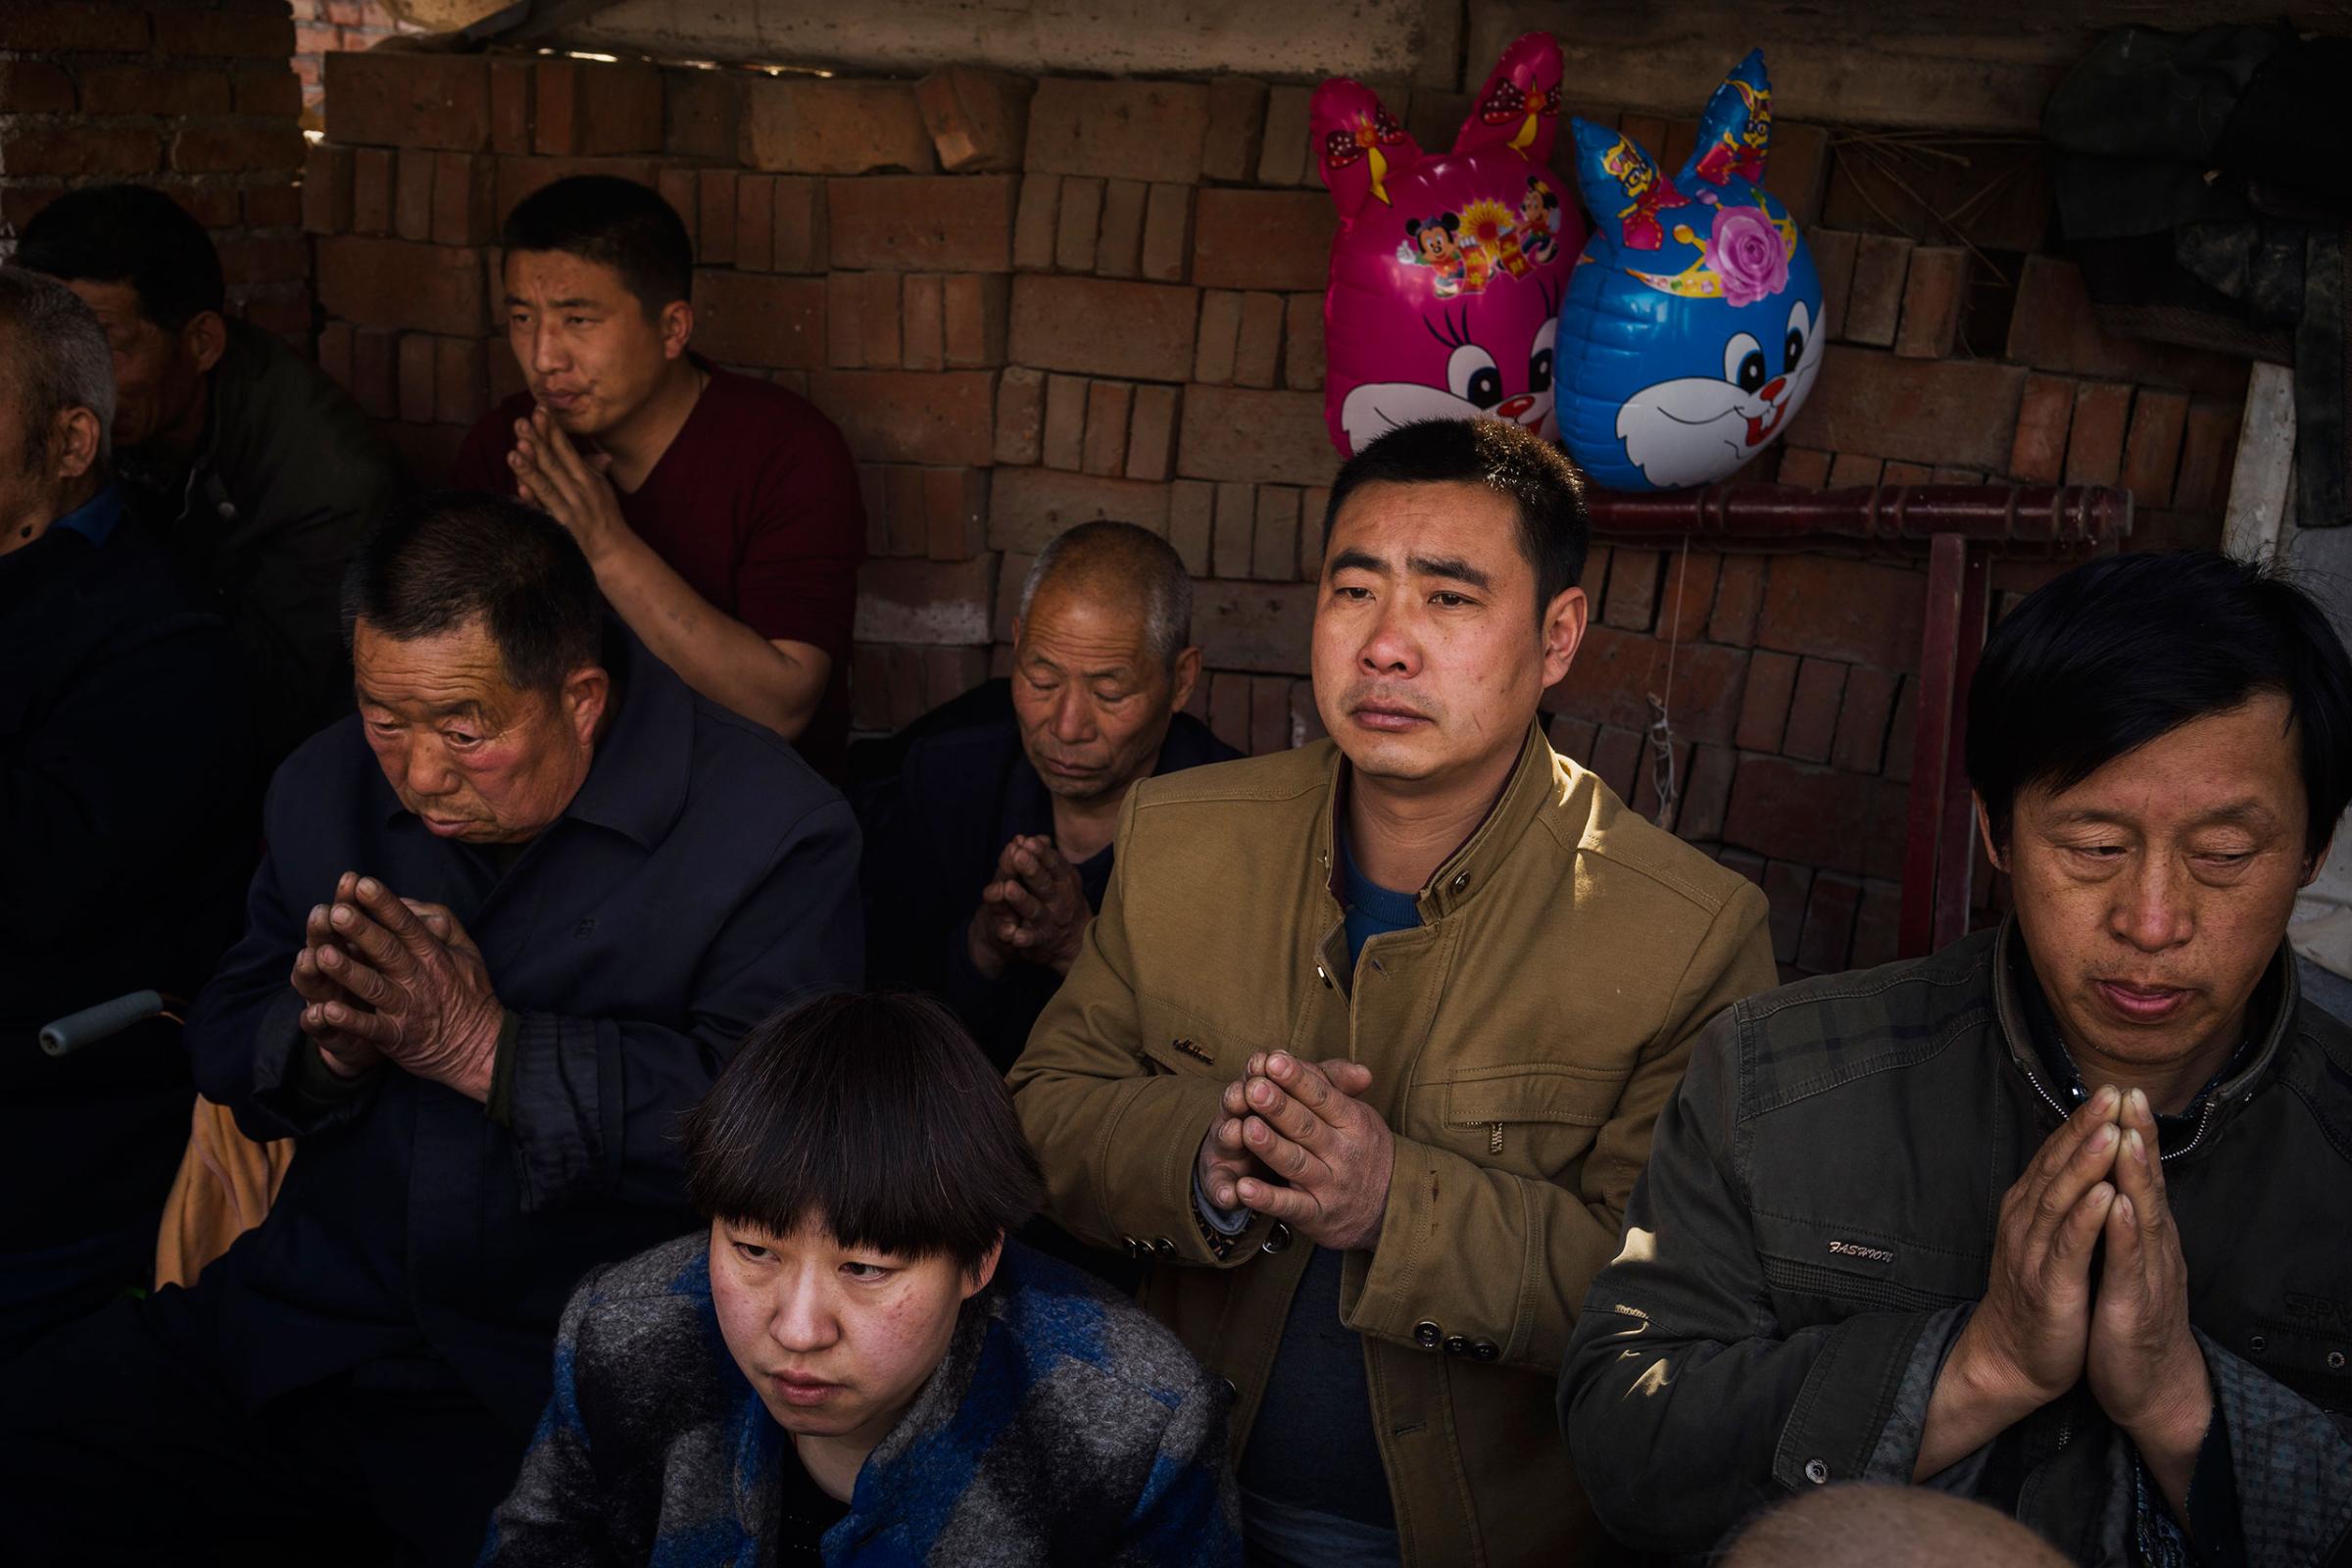 Villagers pray at an underground Easter Sunday Mass led by dissident Catholic Priest Dong Baolu in the yard of his house in Youtong village, Shijiazhuang, China, March 27, 2016.